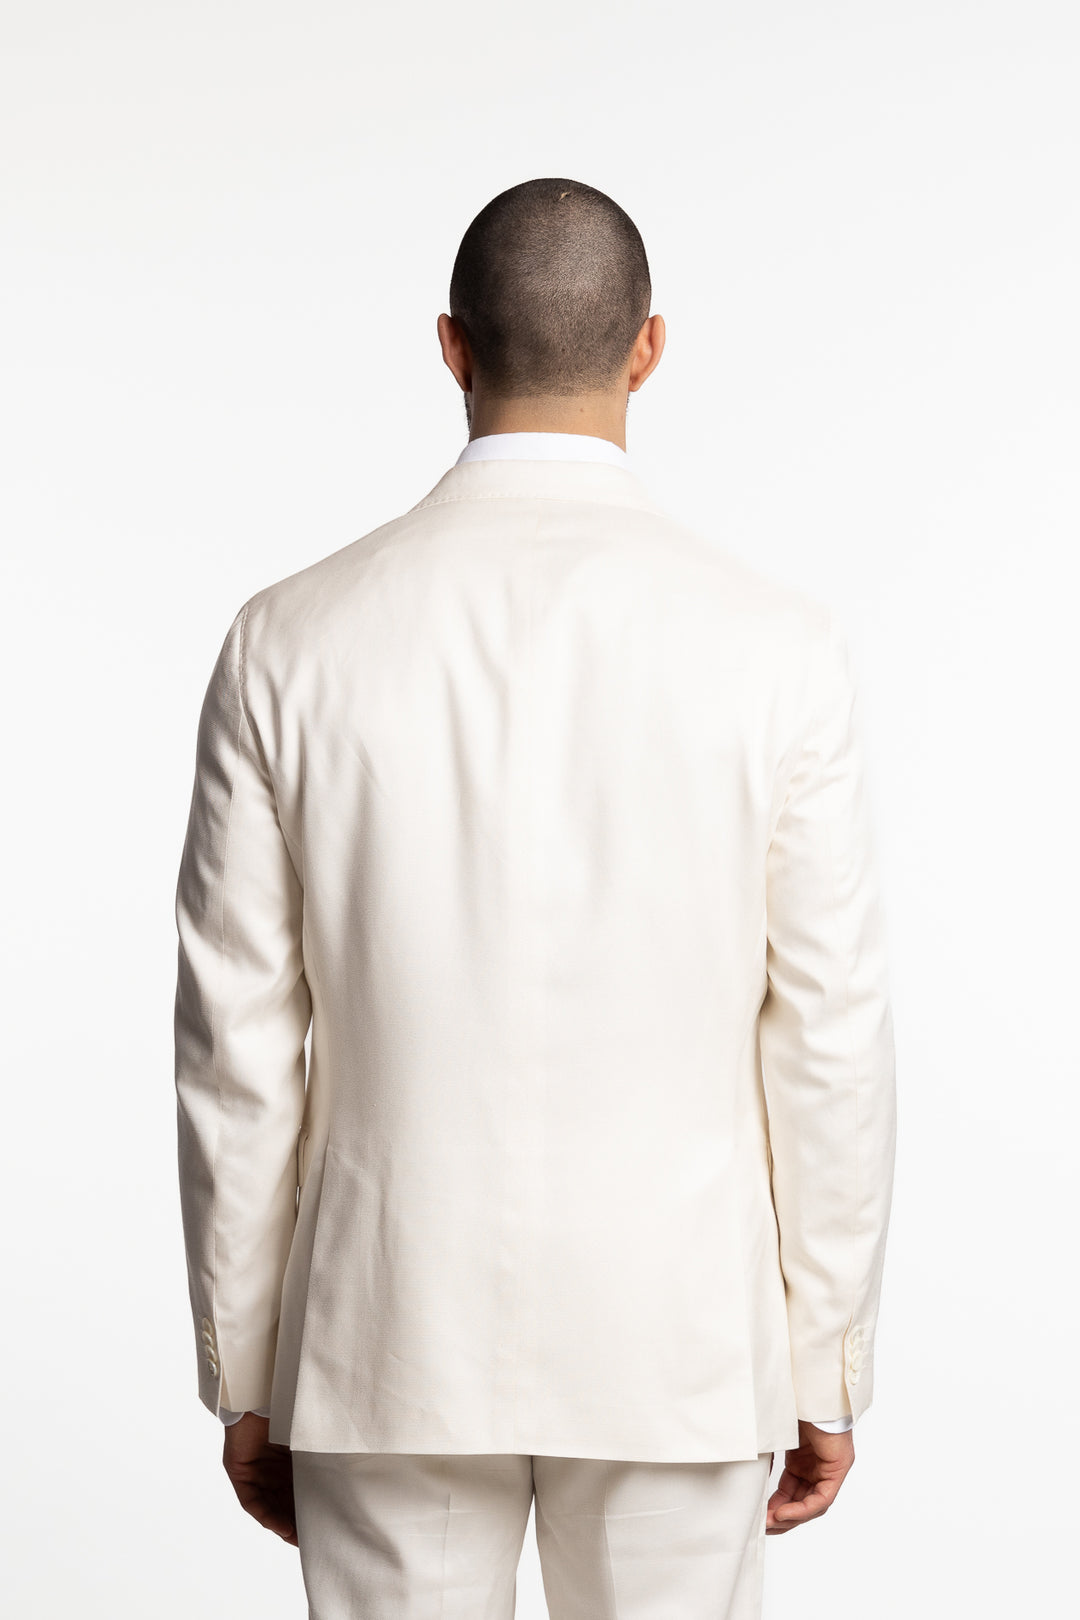 Farris Denz Double Breasted Birdseye Suit Off-White